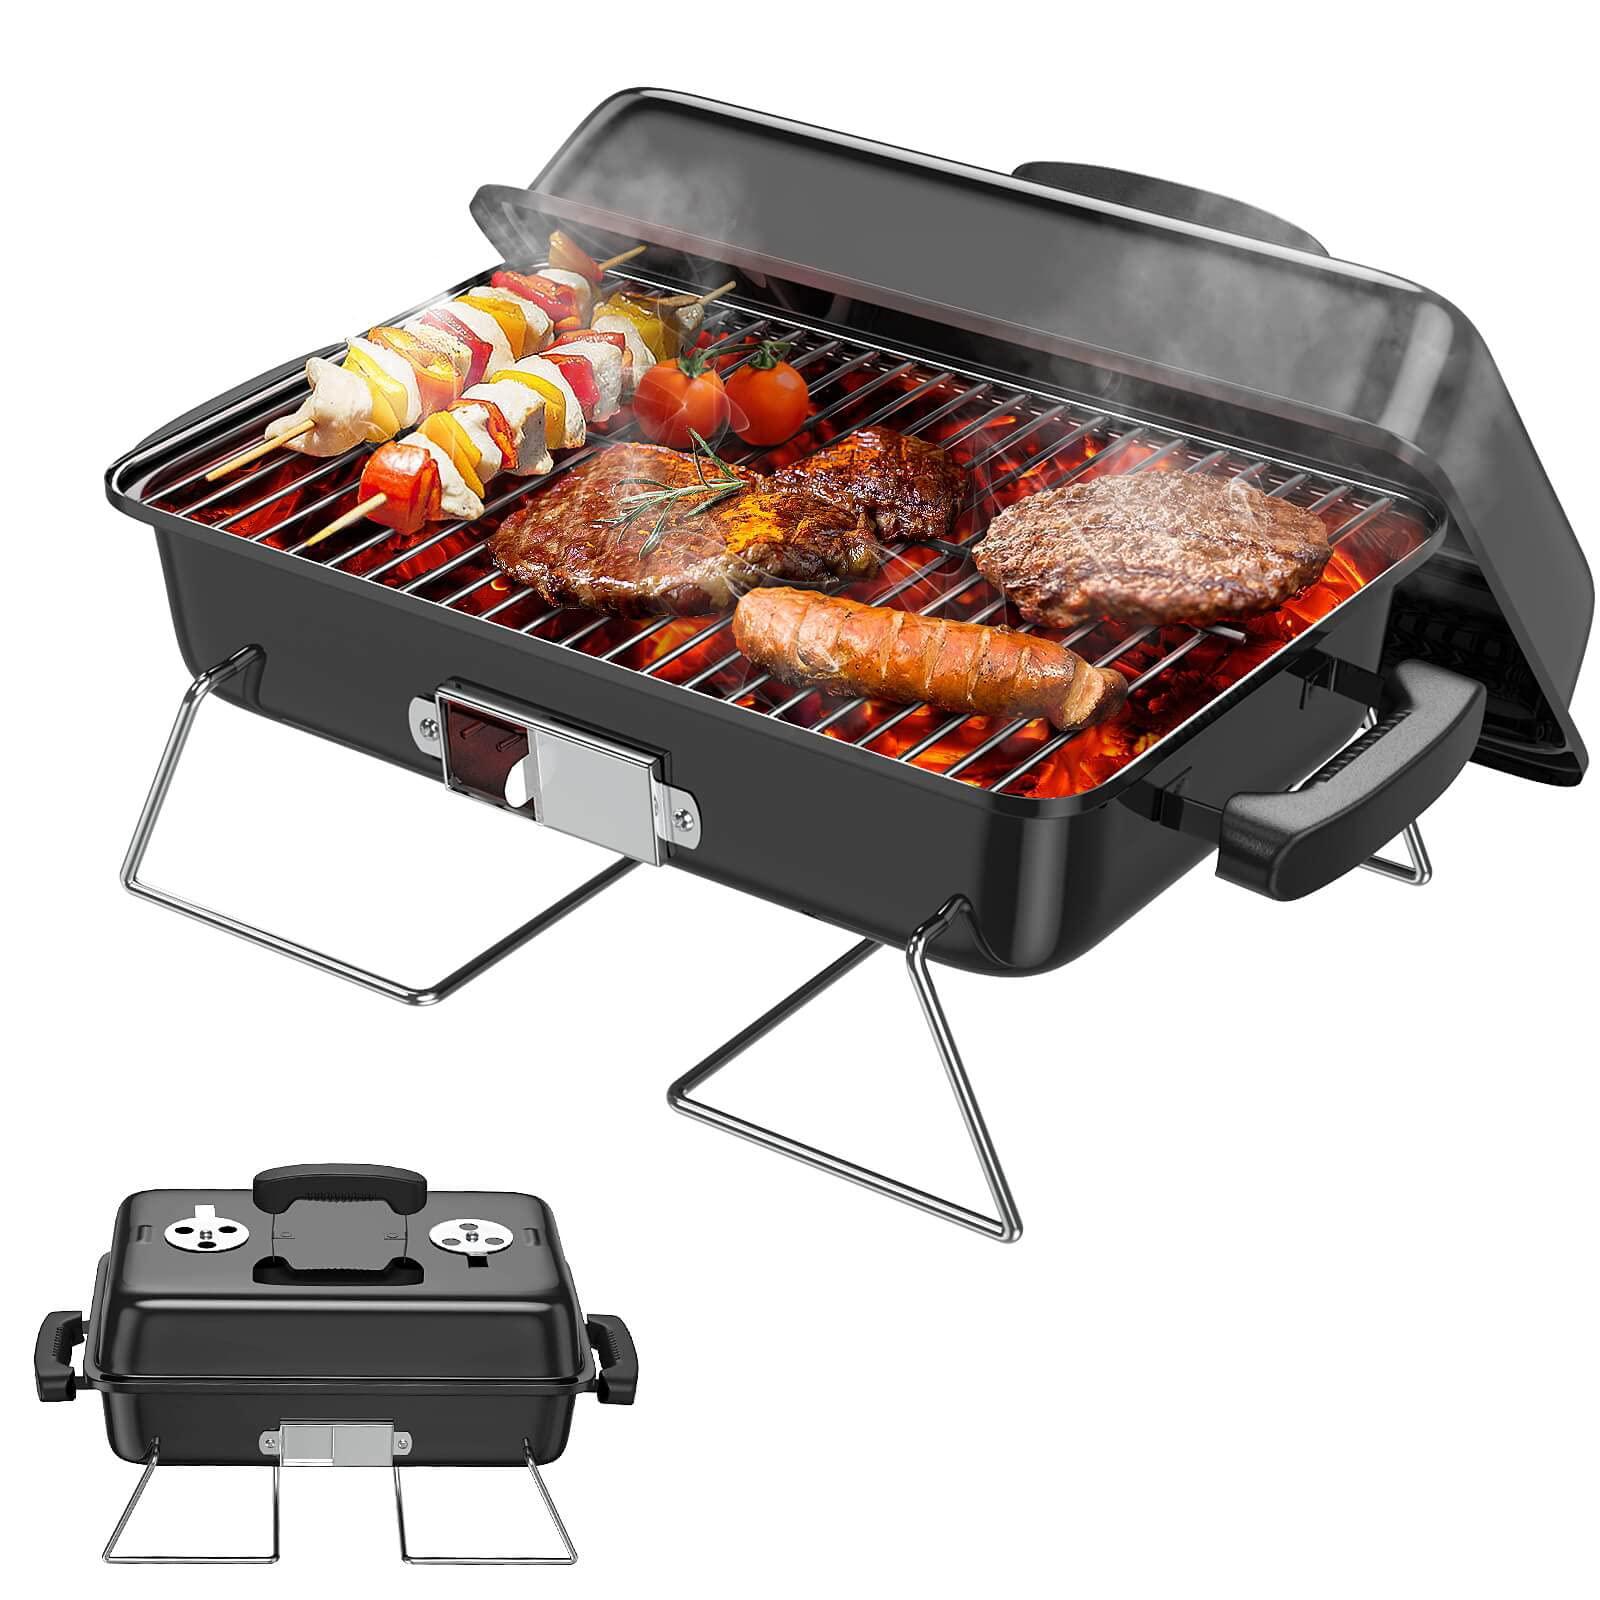 resvin charcoal grills, portable charcoal grill with lid stainless steel barbecue grill, small folding tabletop grill for out